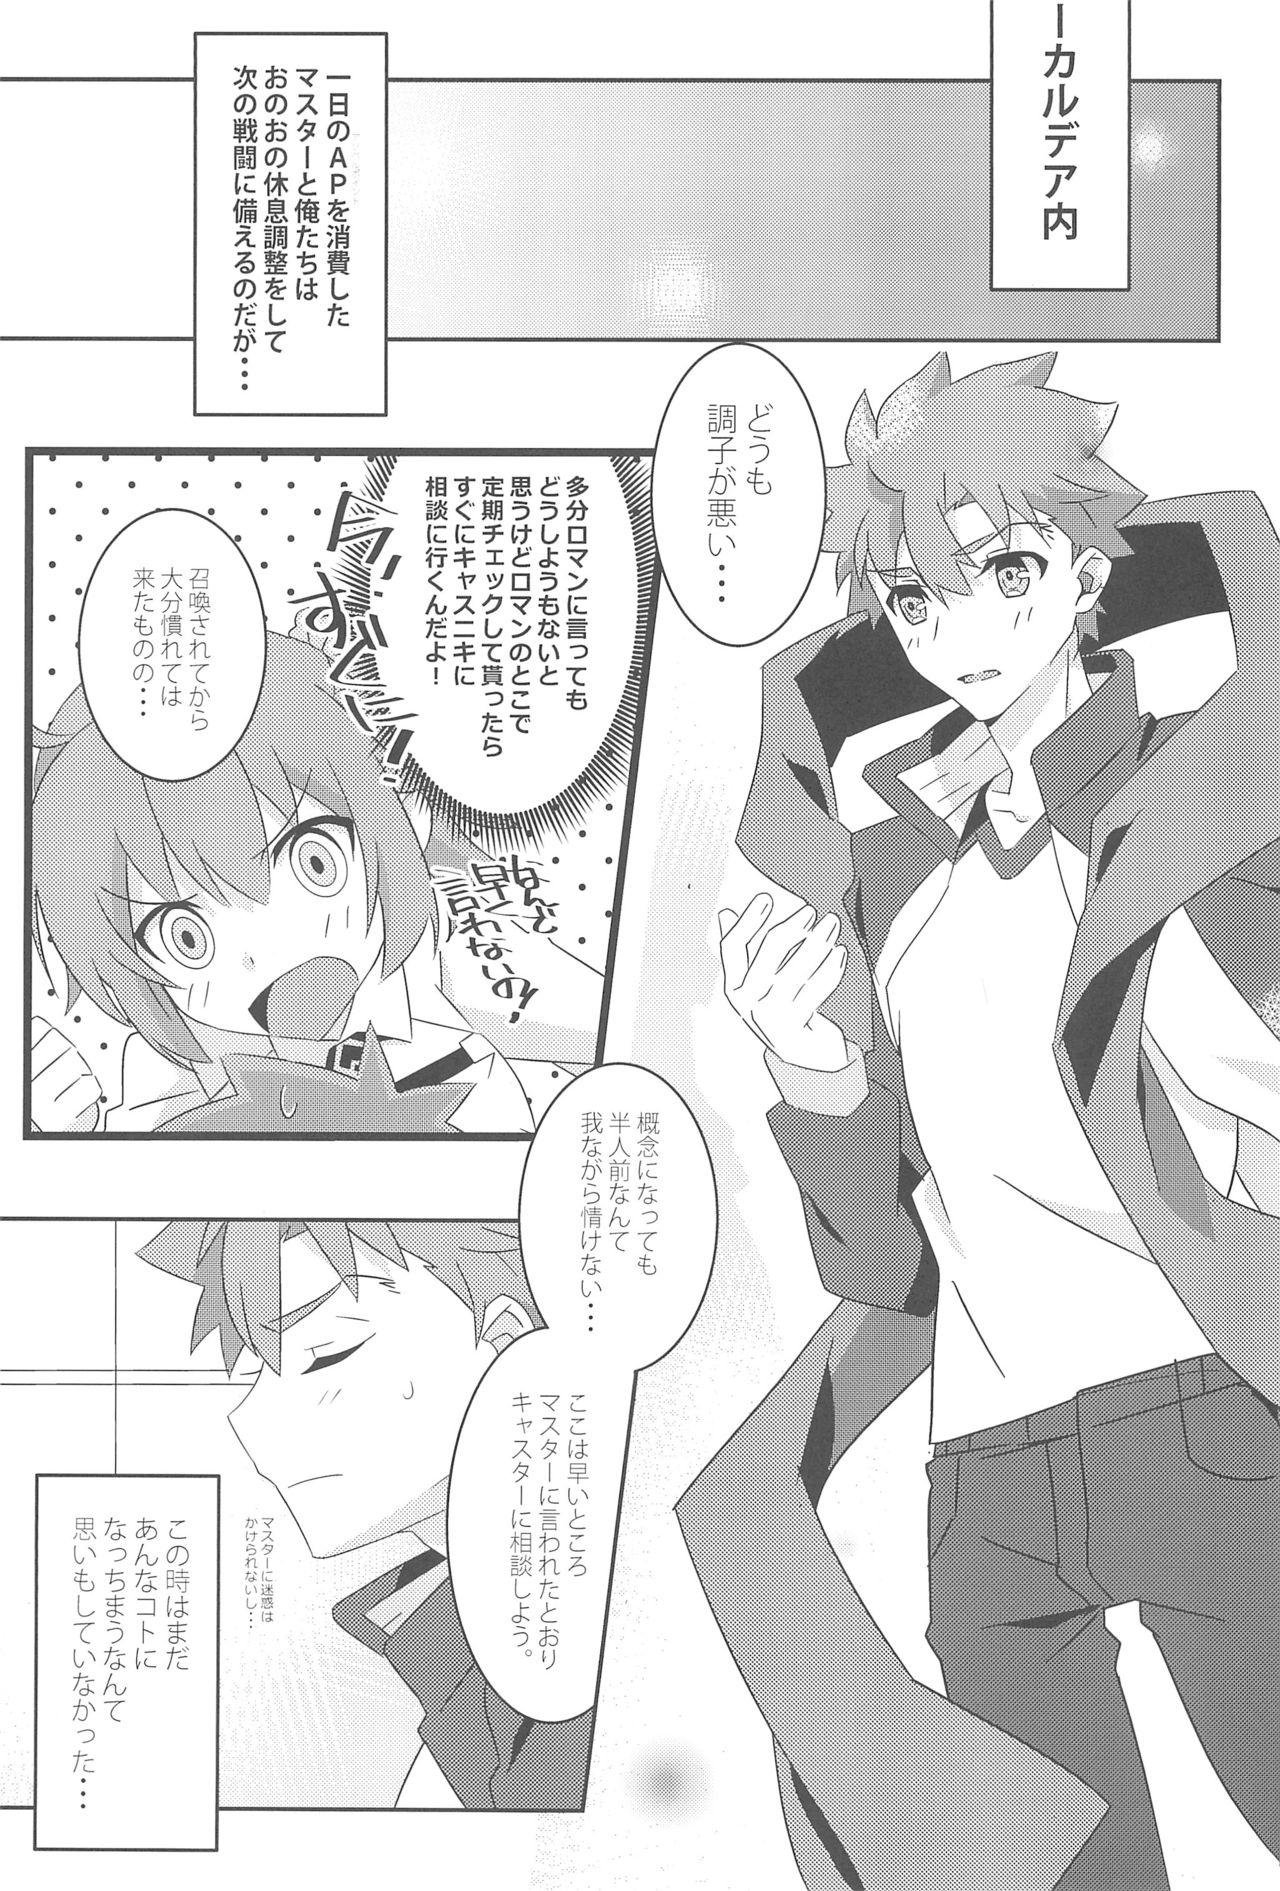 Canadian COME TO ME - Fate stay night Caiu Na Net - Page 5